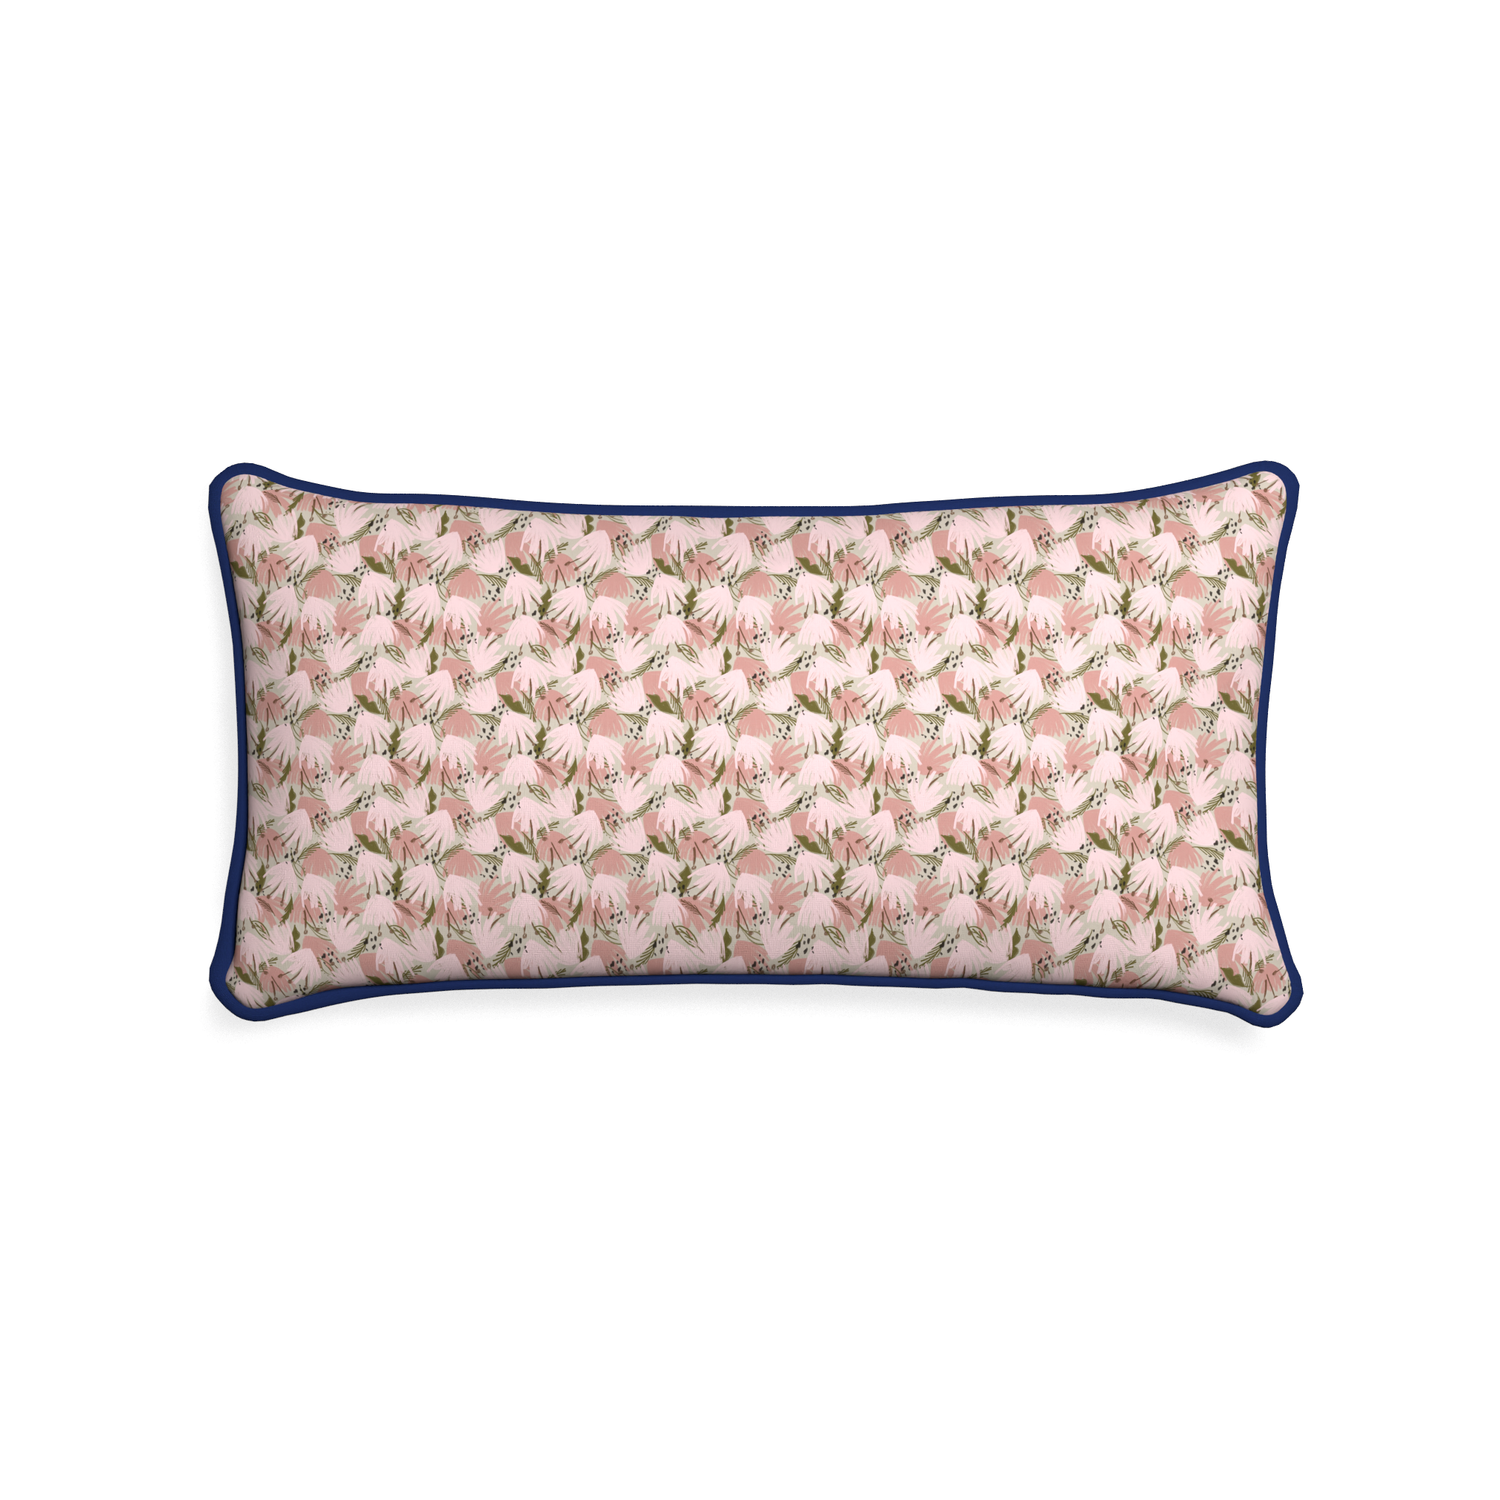 Midi-lumbar eden pink custom pink floralpillow with midnight piping on white background